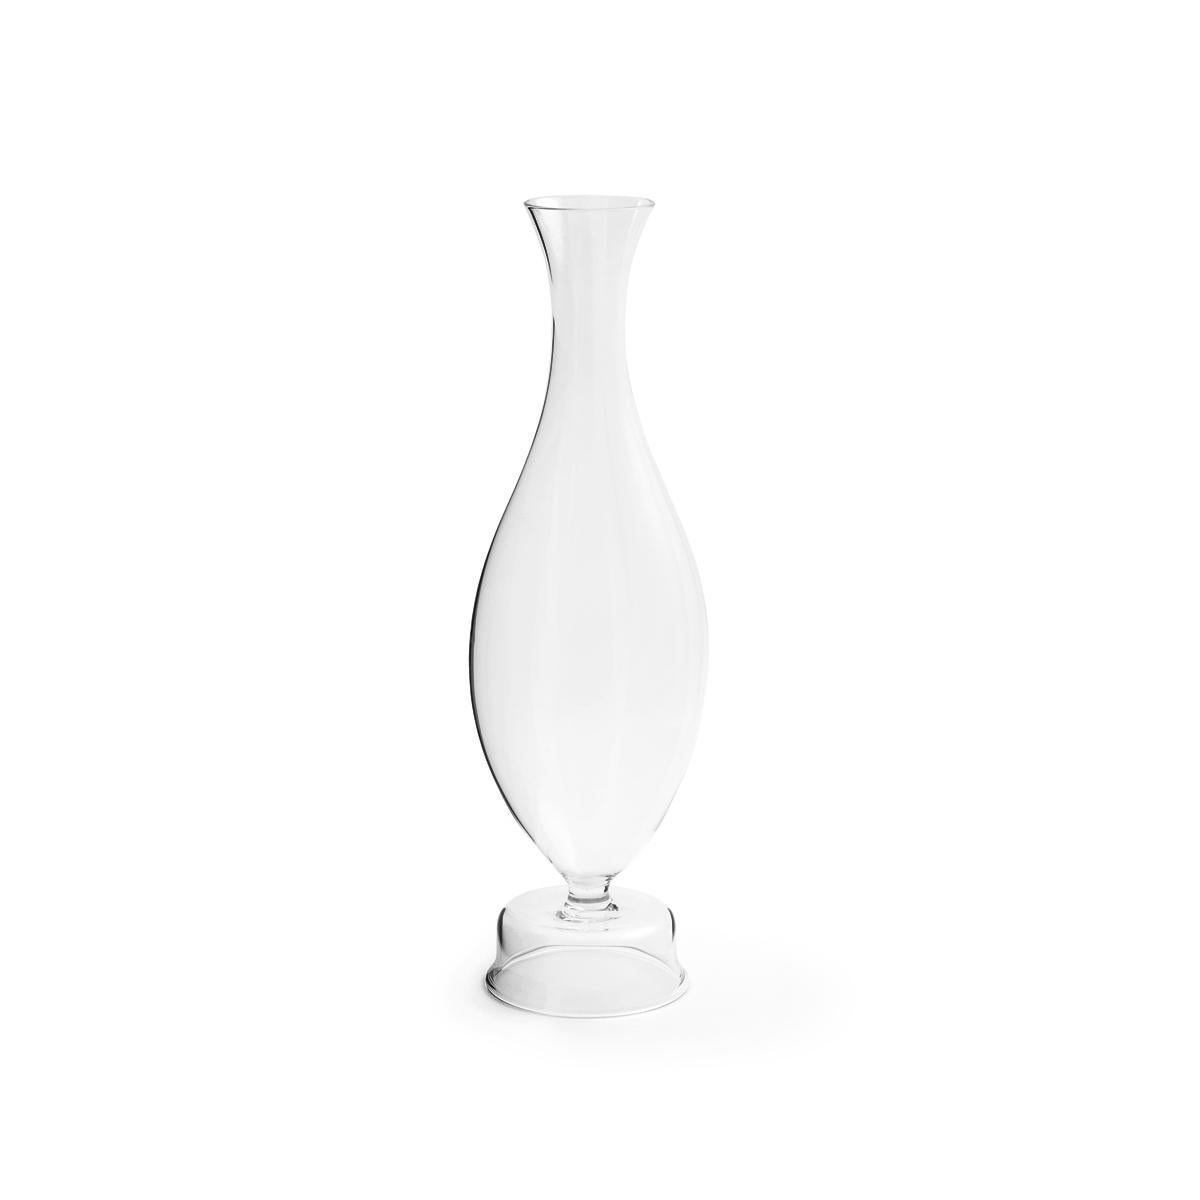 Pims is a mouth-blown borosilicate glass bottle with a slim shape; a little masterpiece in which Paola C.’s craftsmen ability meets Aldo Cibic's design. Pims reminds the glass objects which appear in still-life paintings. However, it is not a